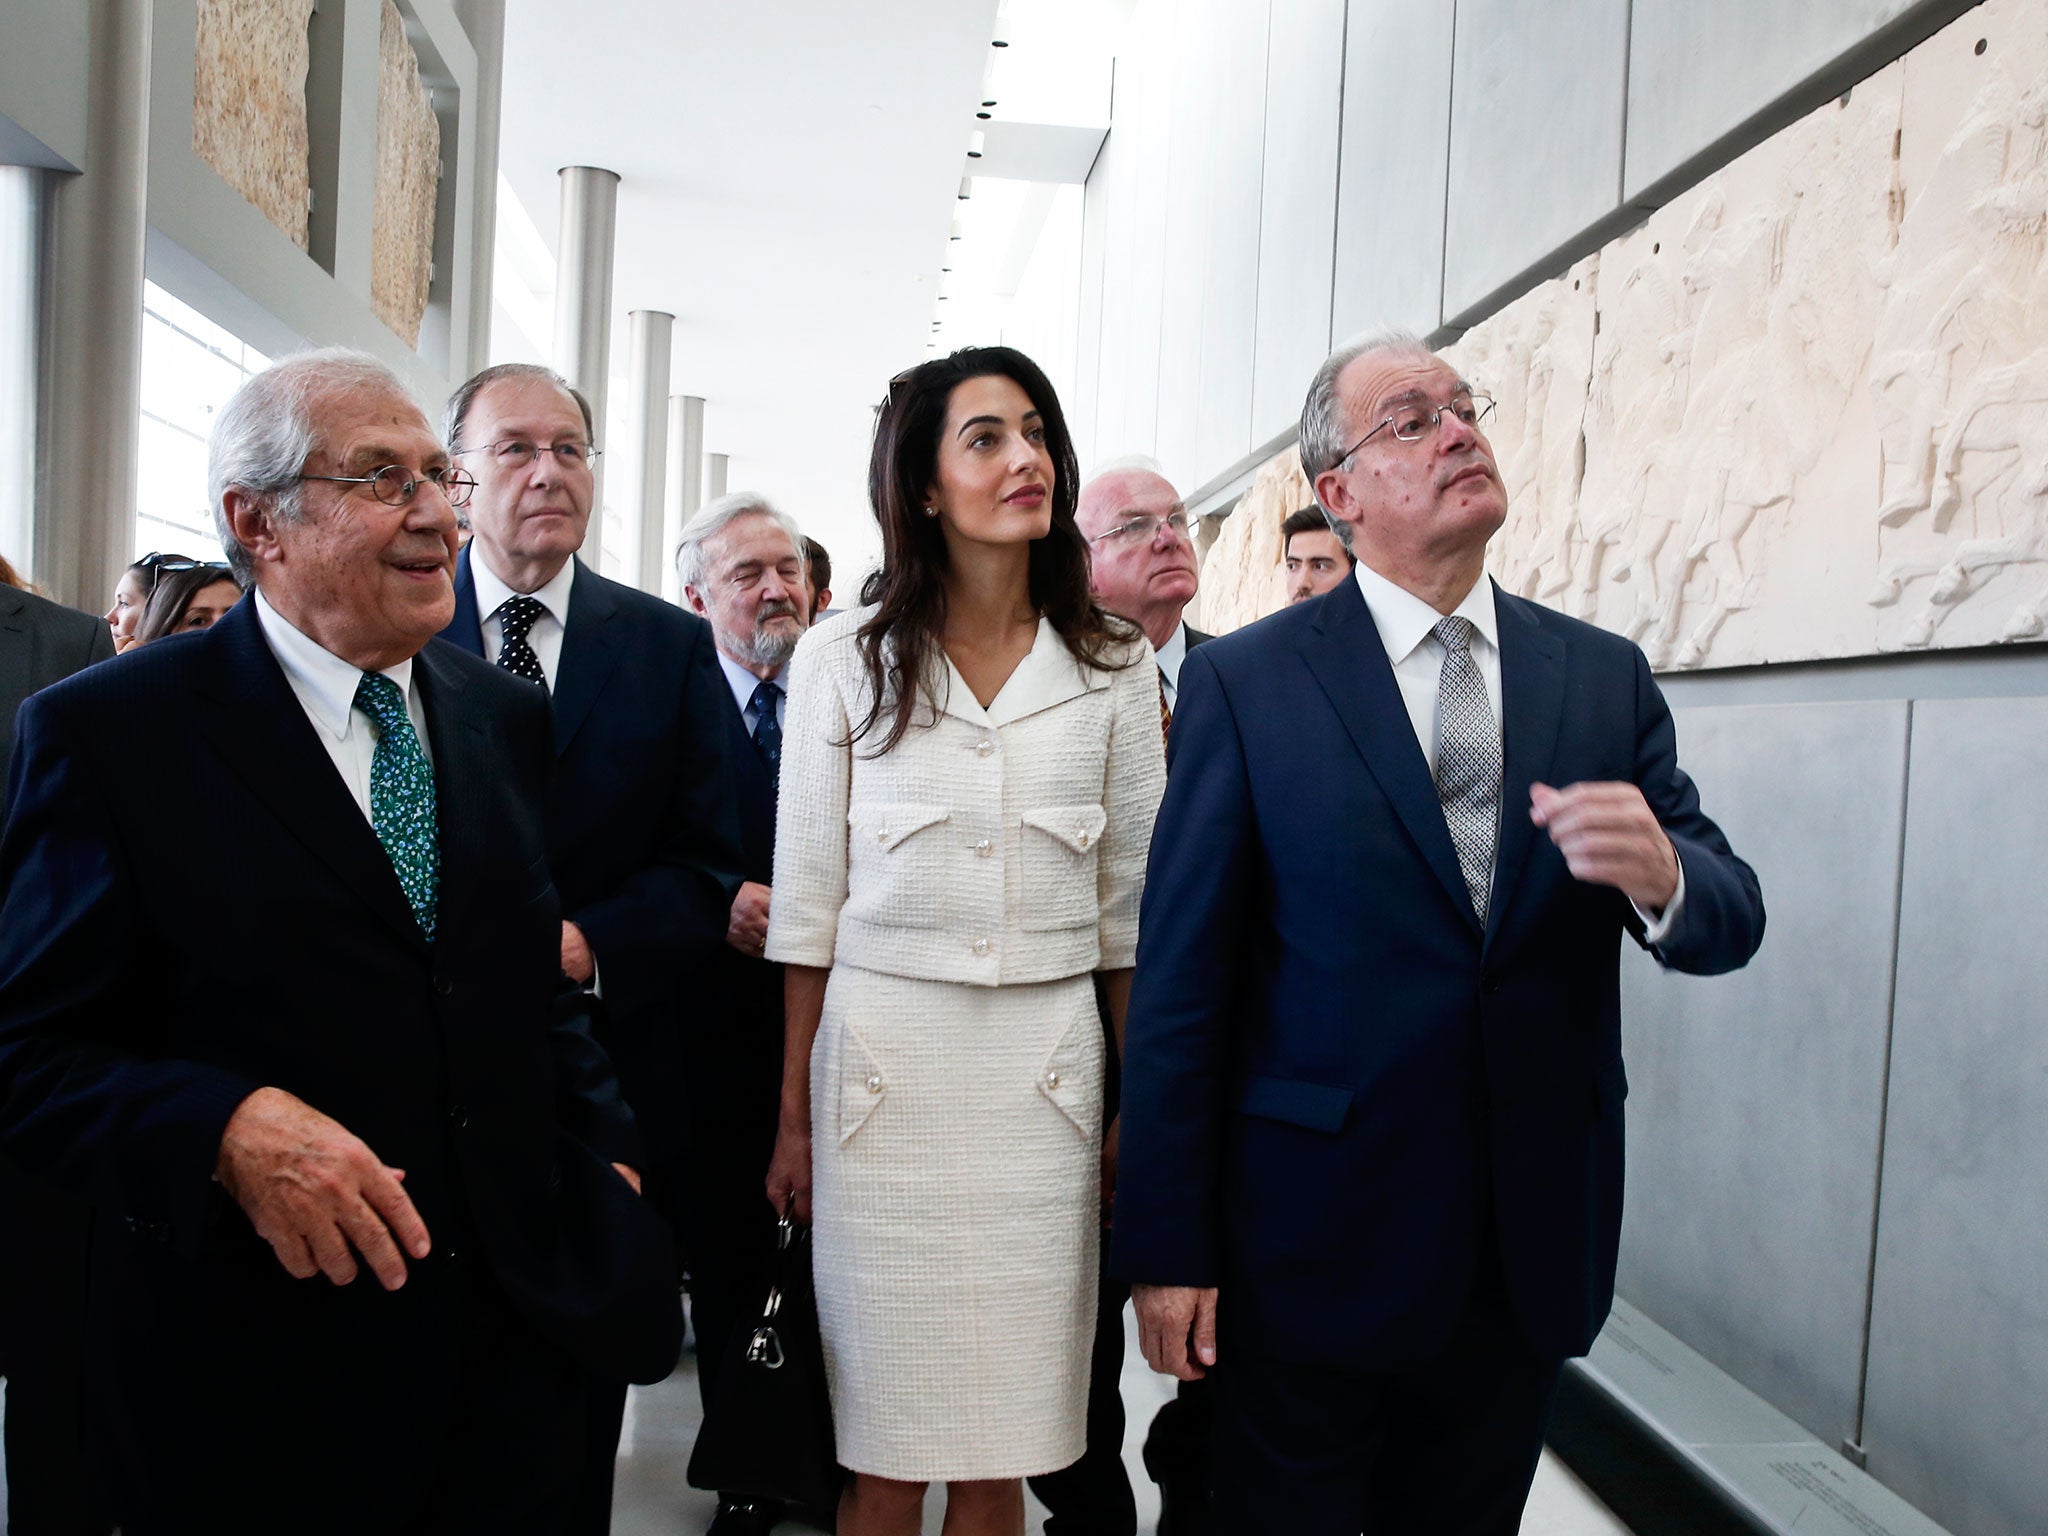 Amal Clooney at the Acropolis Museum in Athens as part of a team advising the Greek government on the return of the Elgin Marbles